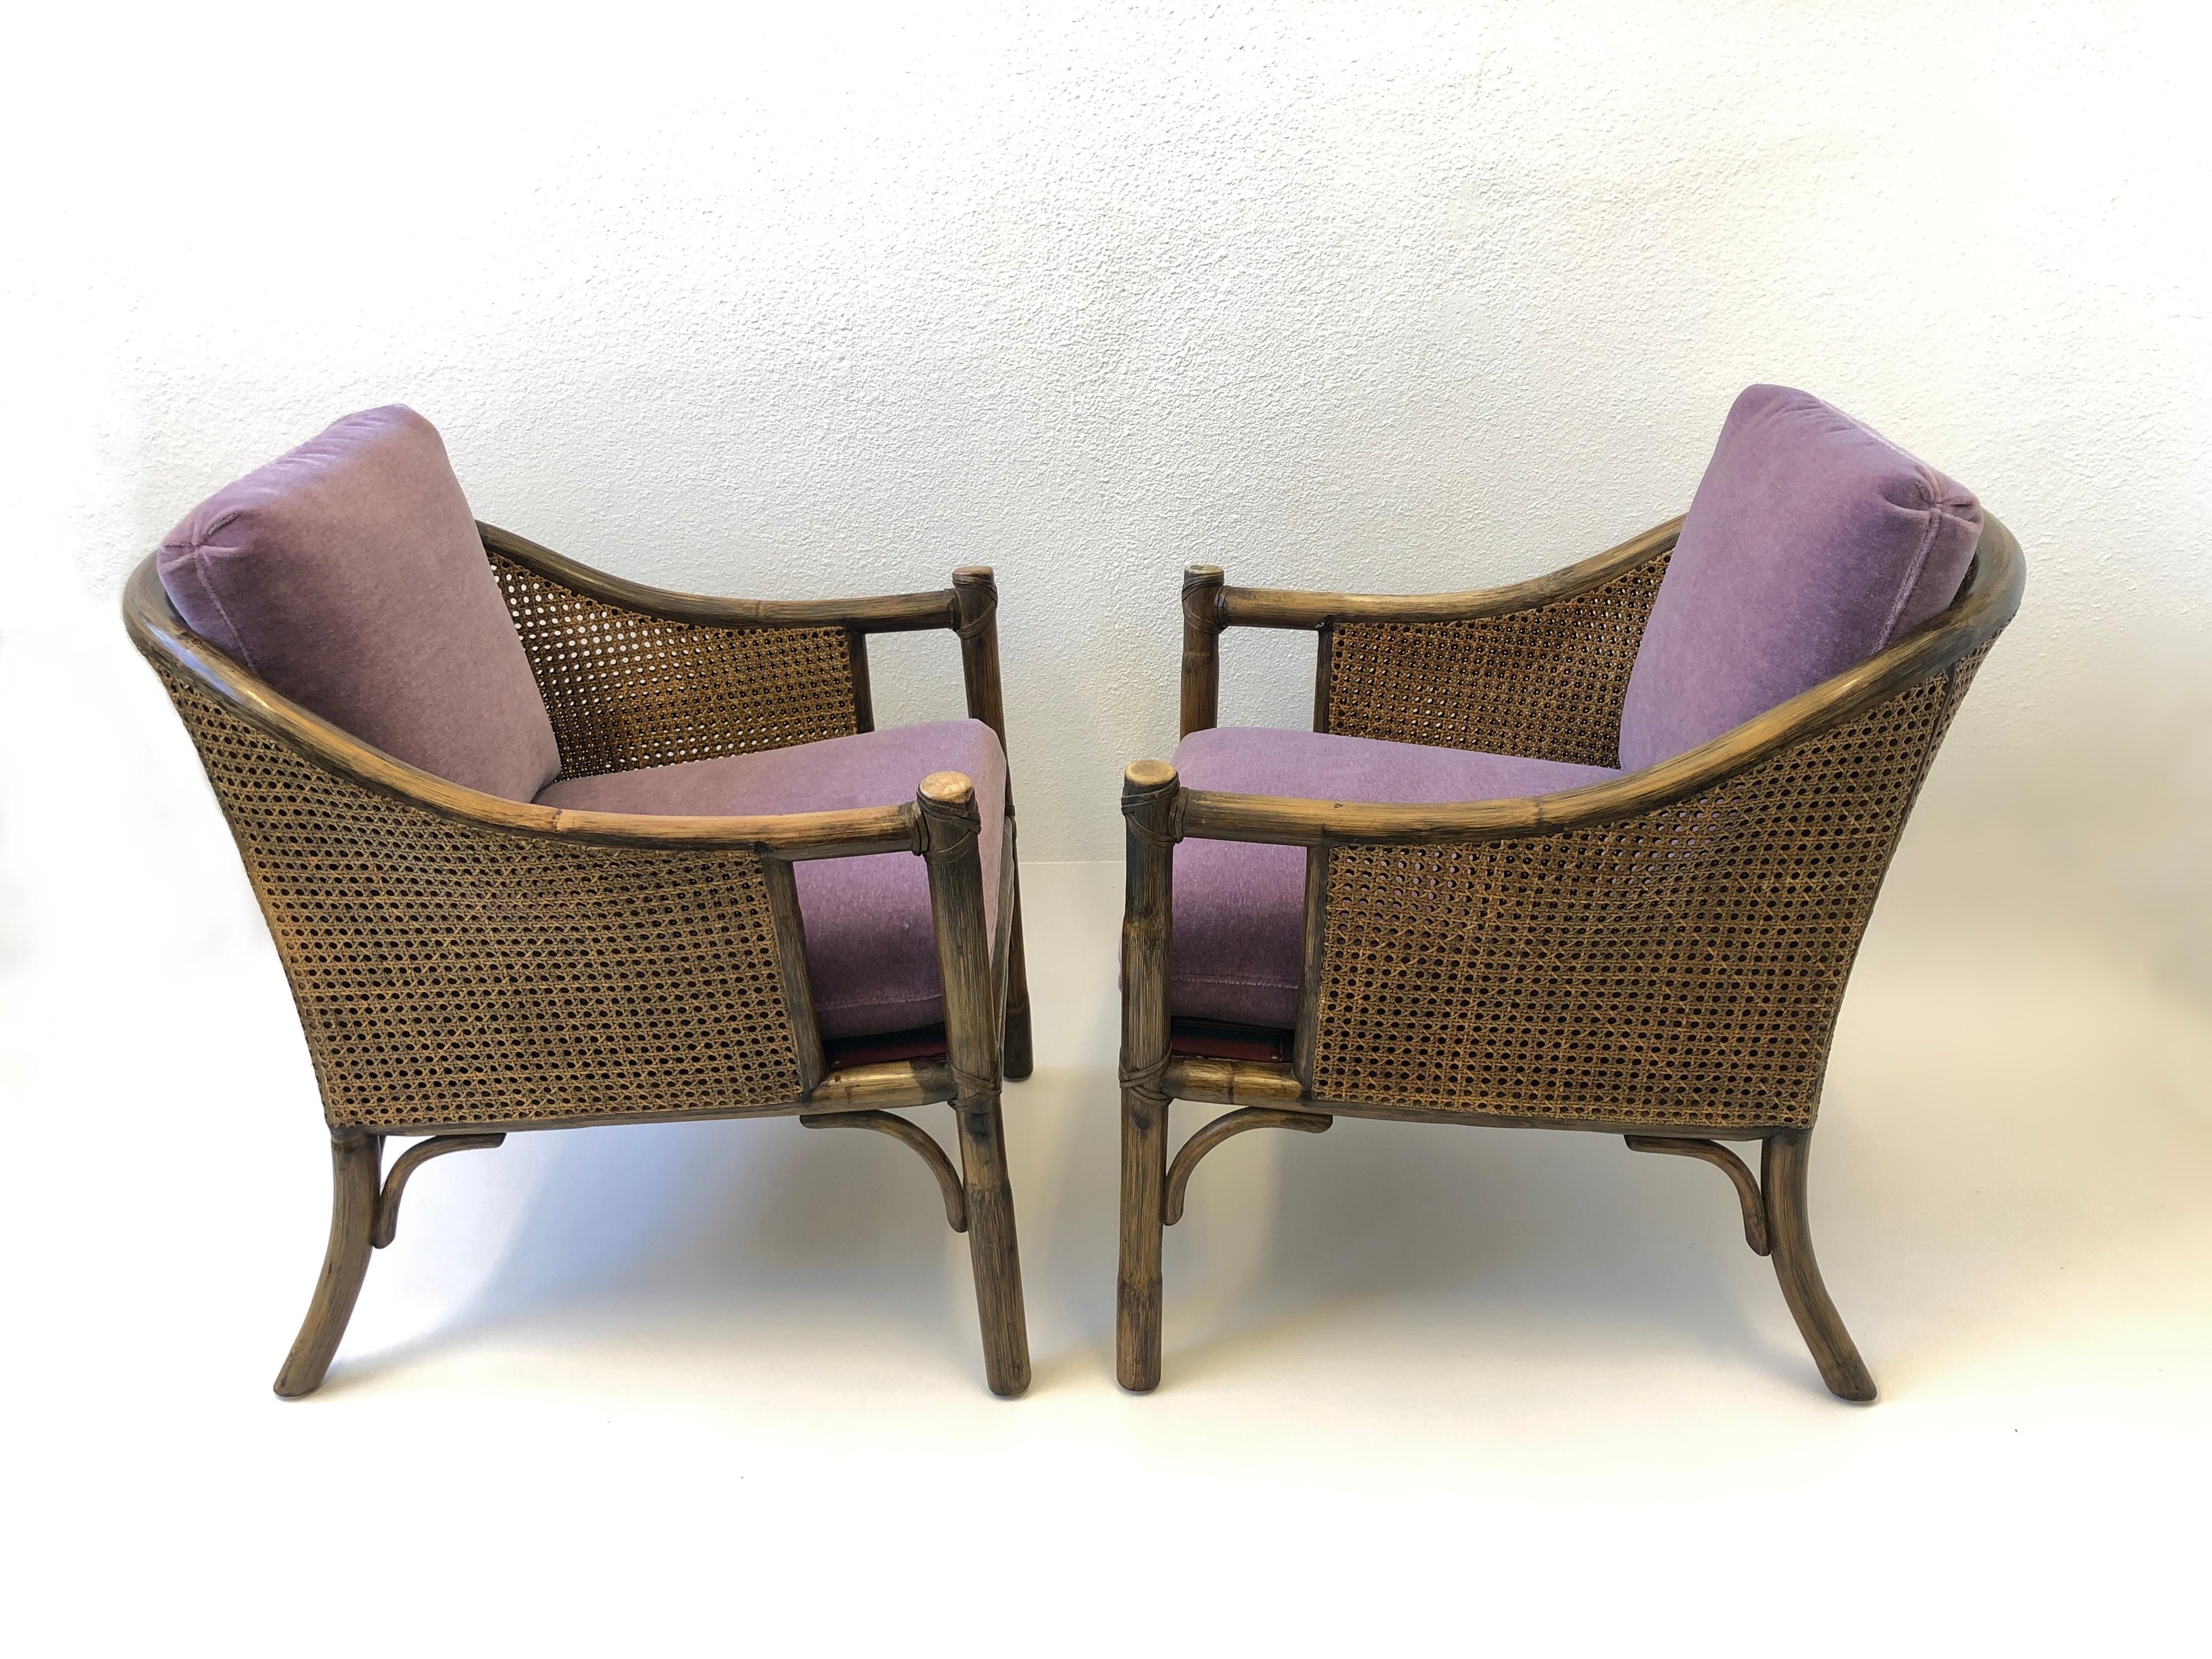 Hollywood Regency Pair of Bamboo and Cane Lounge Chairs by McGuire